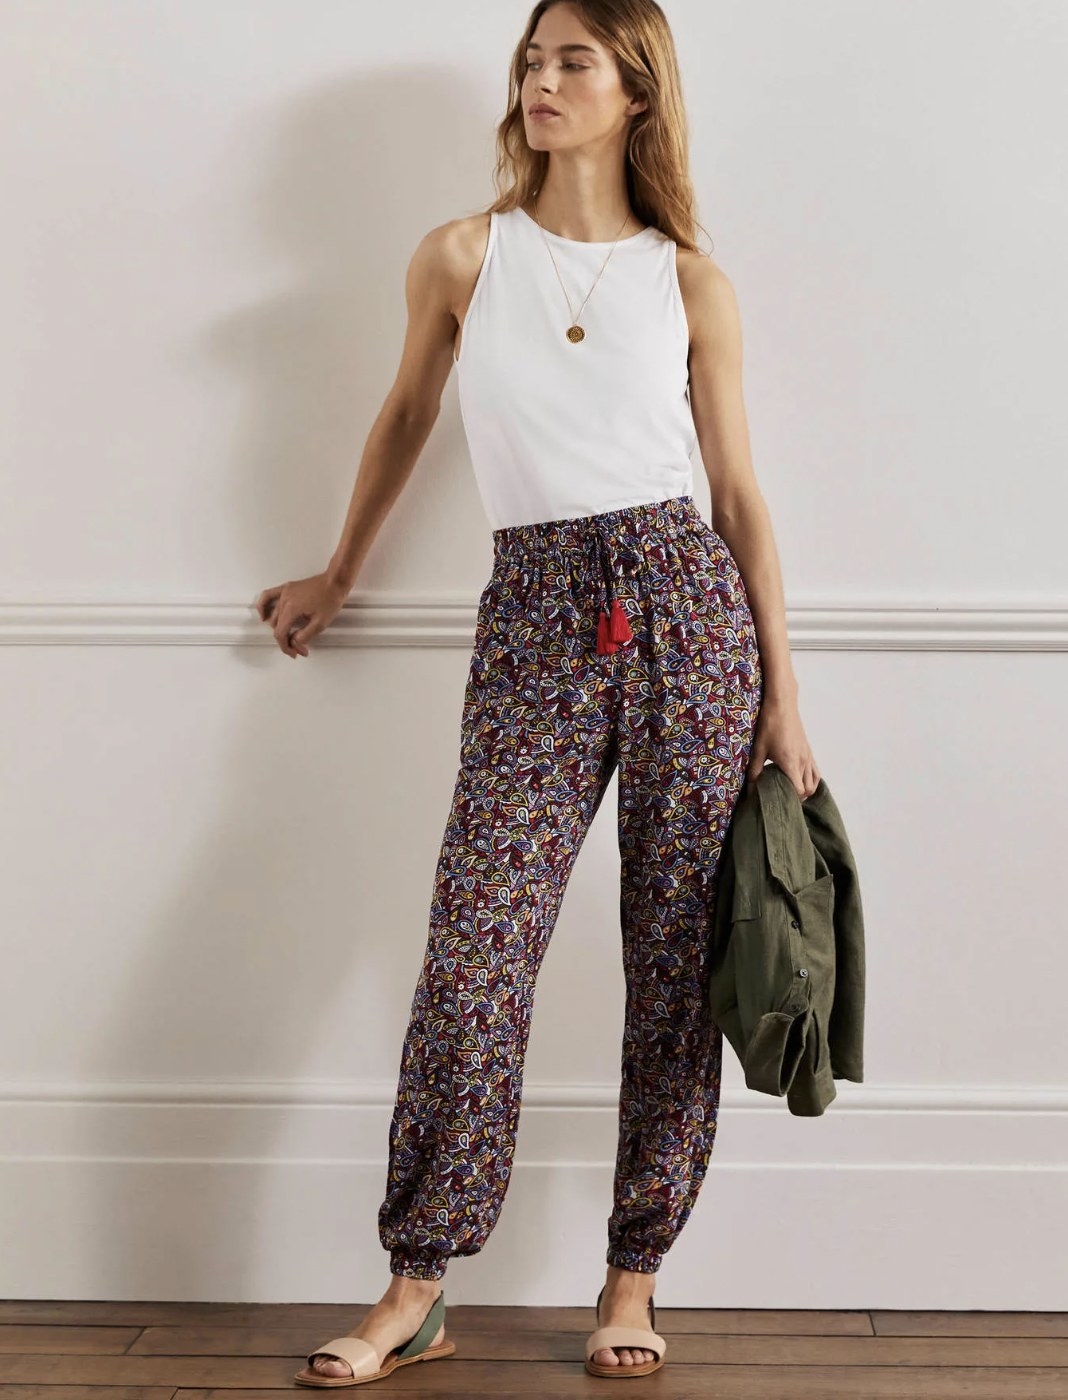 Model posing in the deep purple and red paisley pants with sandals and white tank top